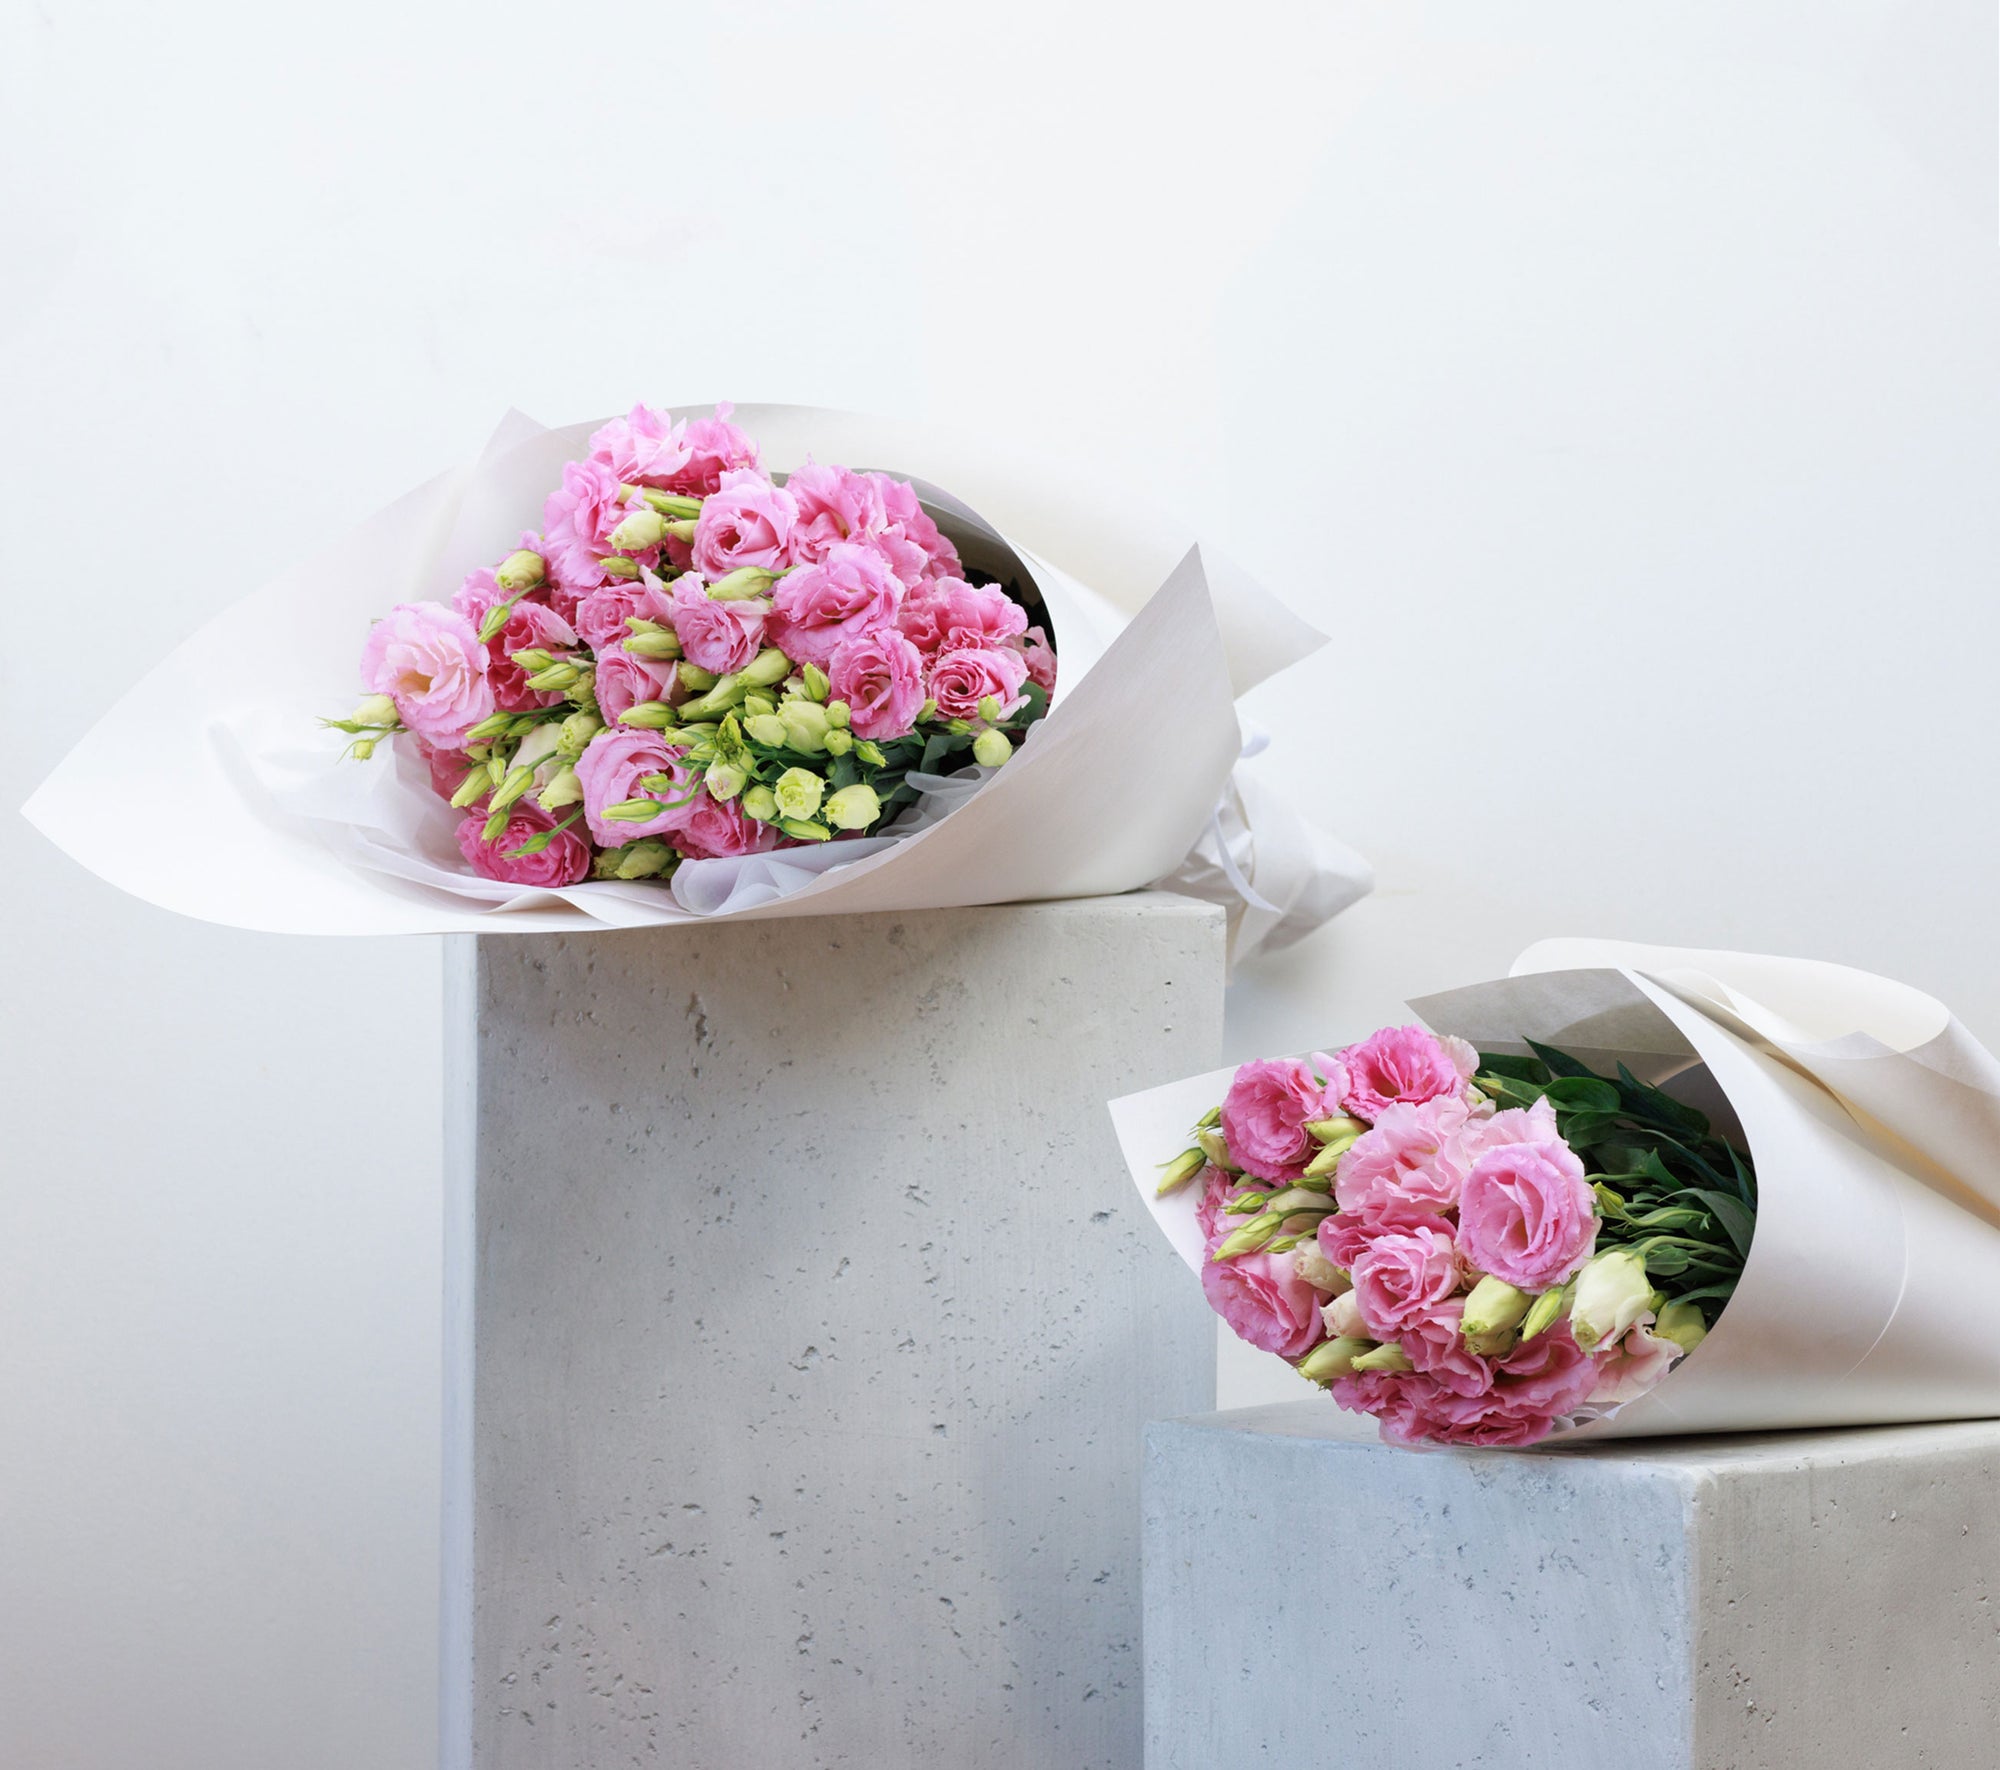 freshly cut flowers, locally grown flowers, flower delivery Melbourne wide